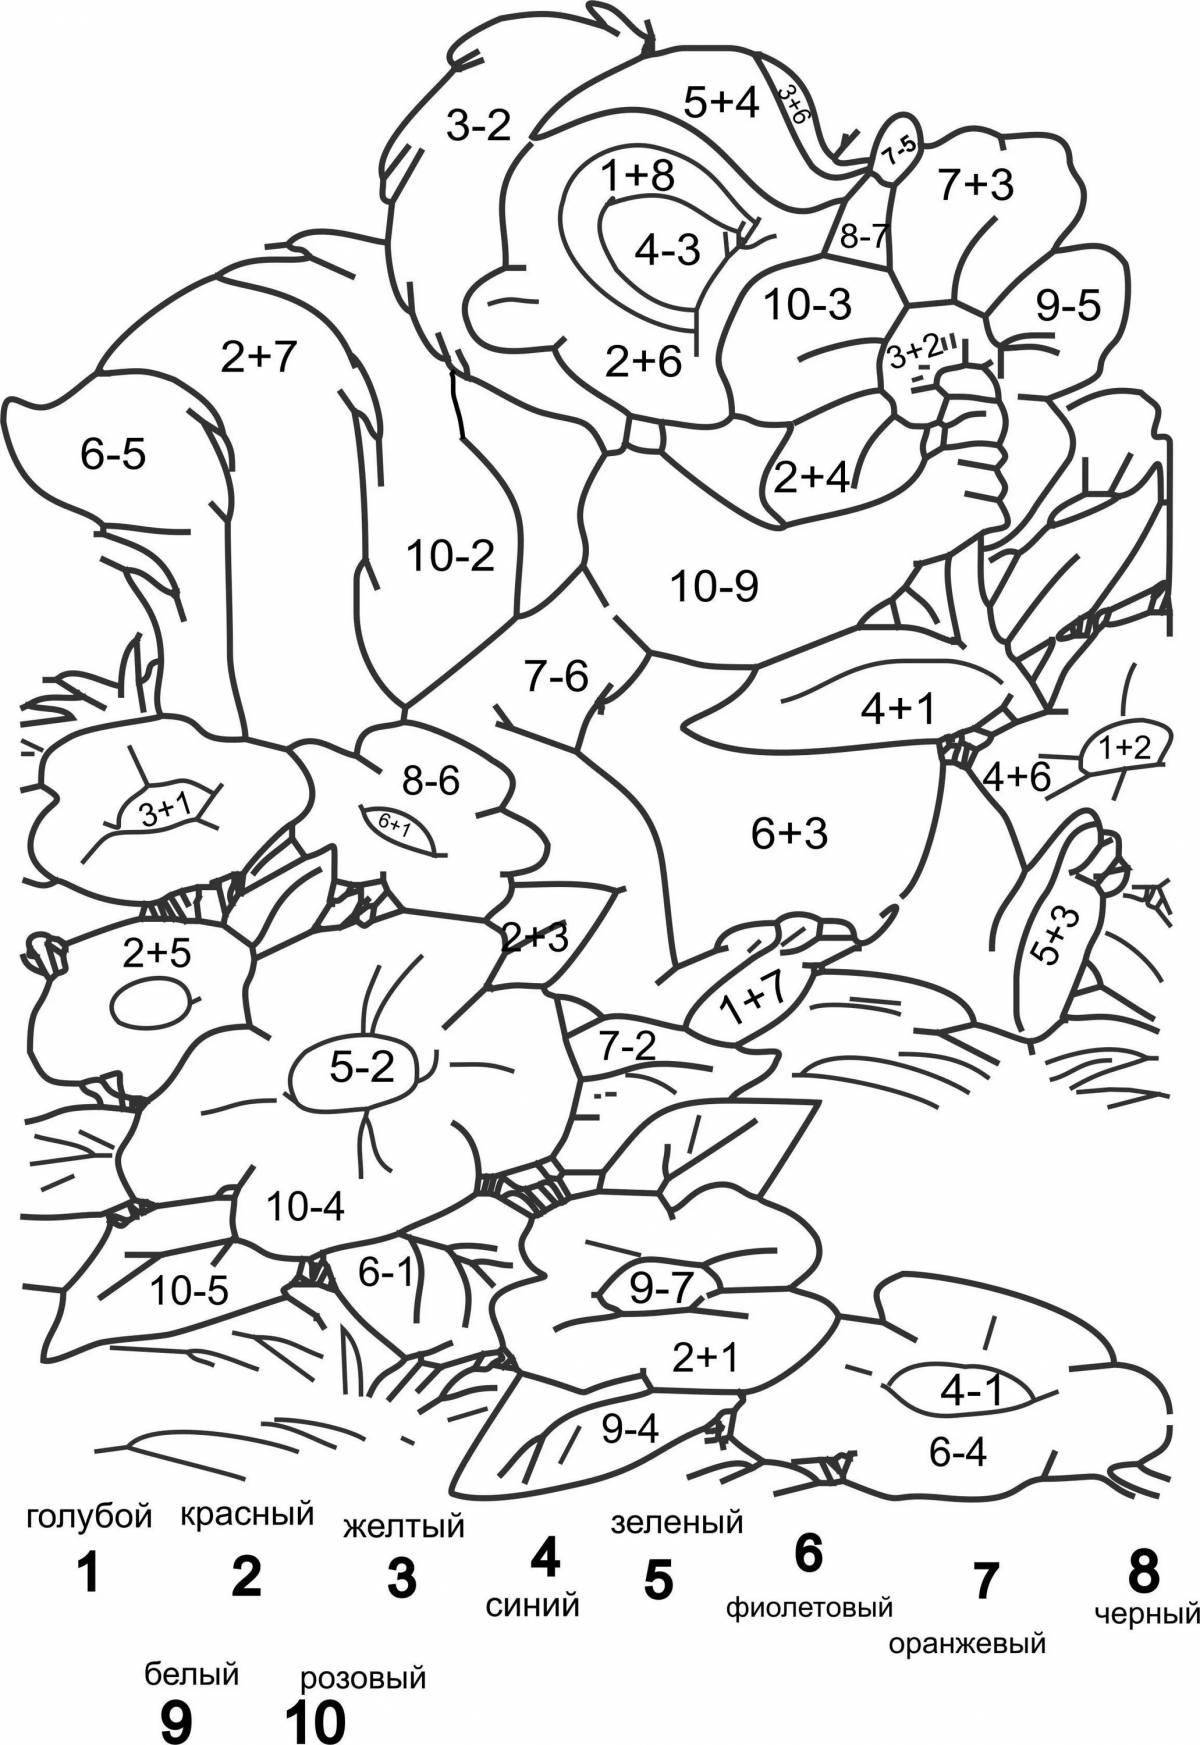 Fun coloring examples for 2nd grade math